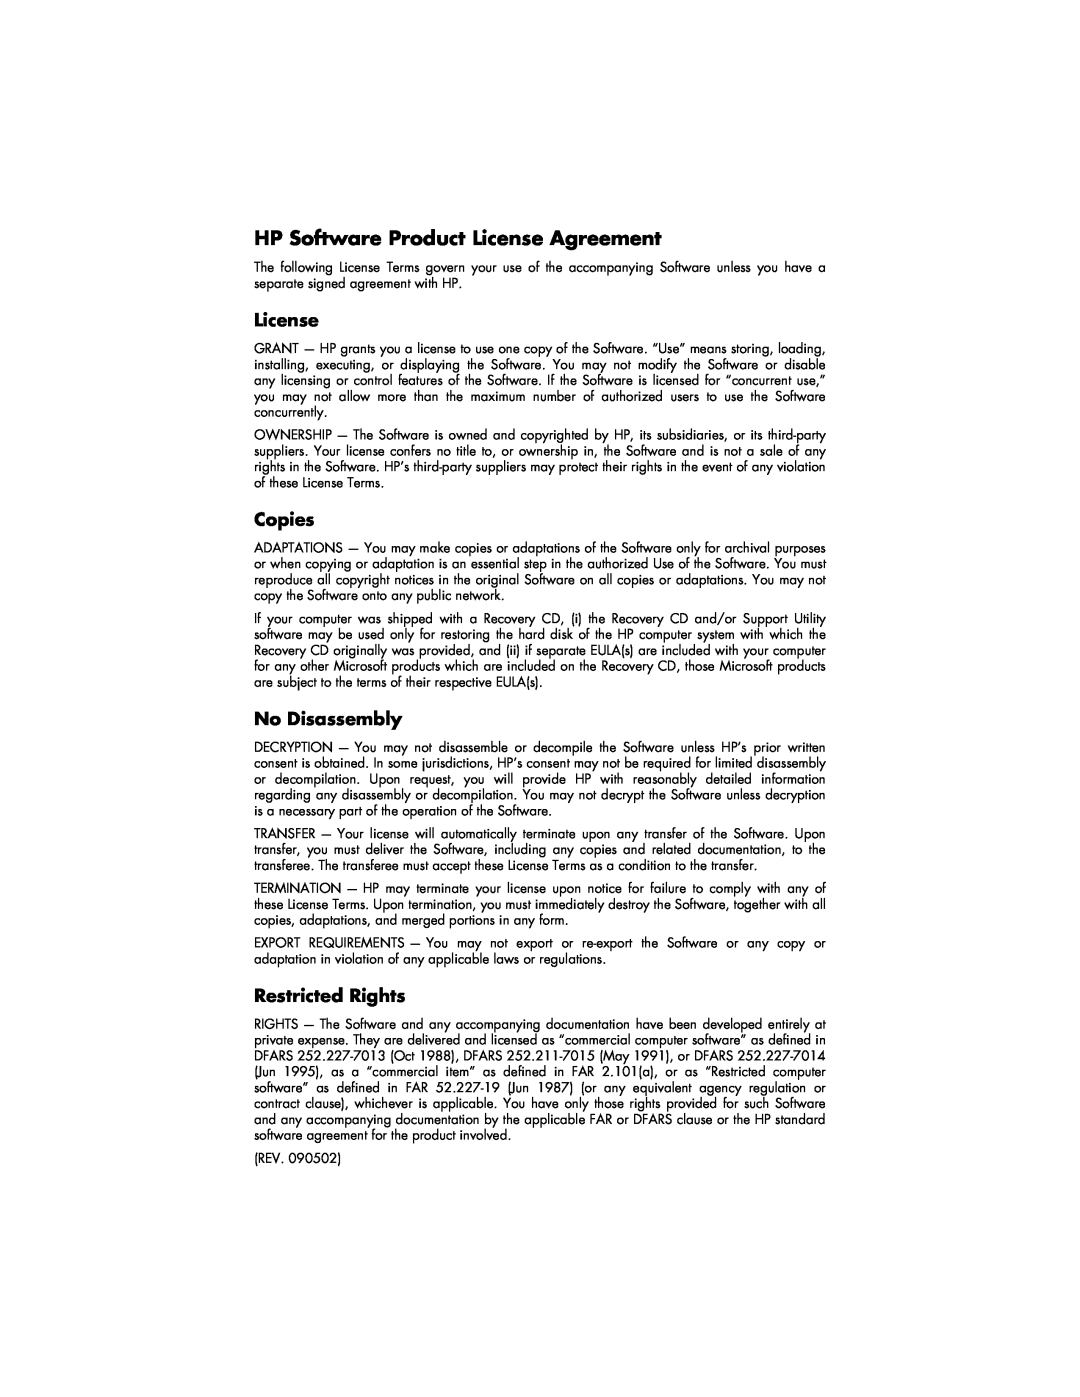 HP 794c (US/CAN), 734n (US/CAN), 524w (US) HP Software Product License Agreement, Copies, No Disassembly, Restricted Rights 